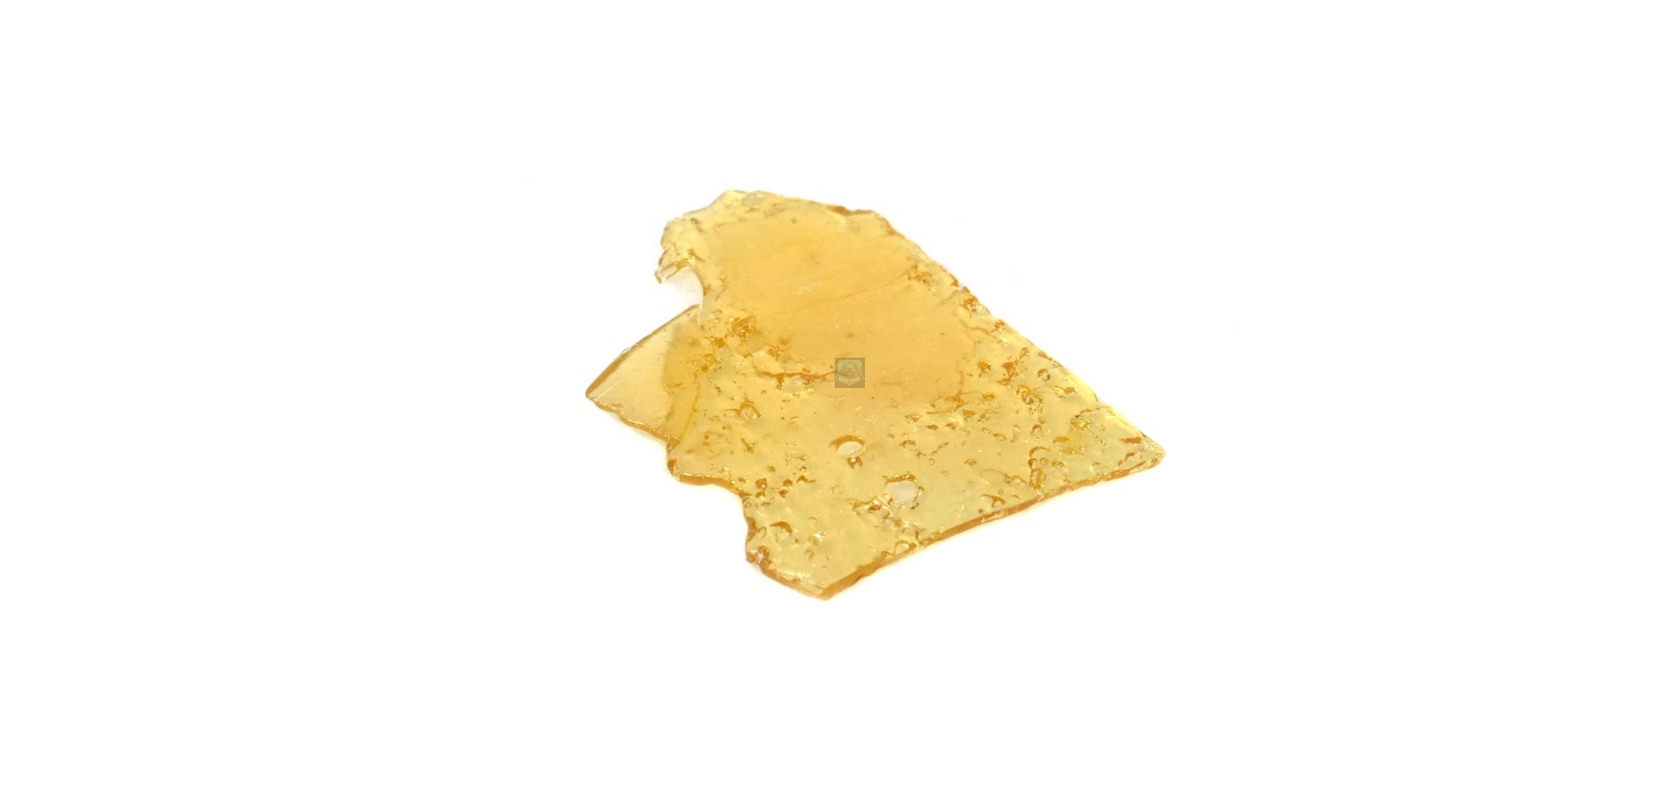 Order your share of Afghani shatter from our dispensary and immerse yourself in middle-eastern delight.